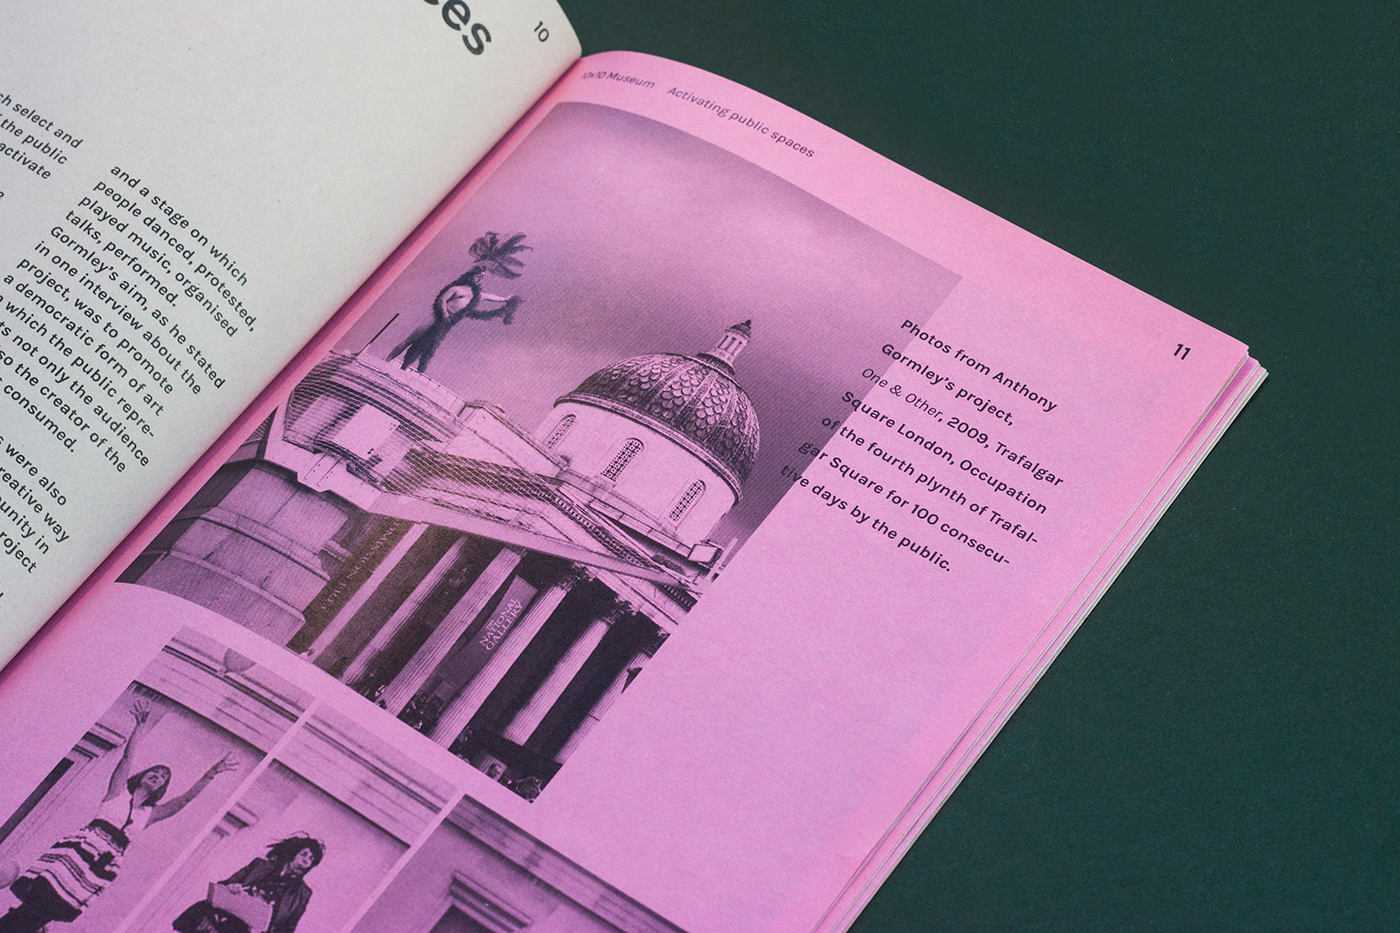 book editorial design museum Layout pink Booklet spread graphic design  graphisme